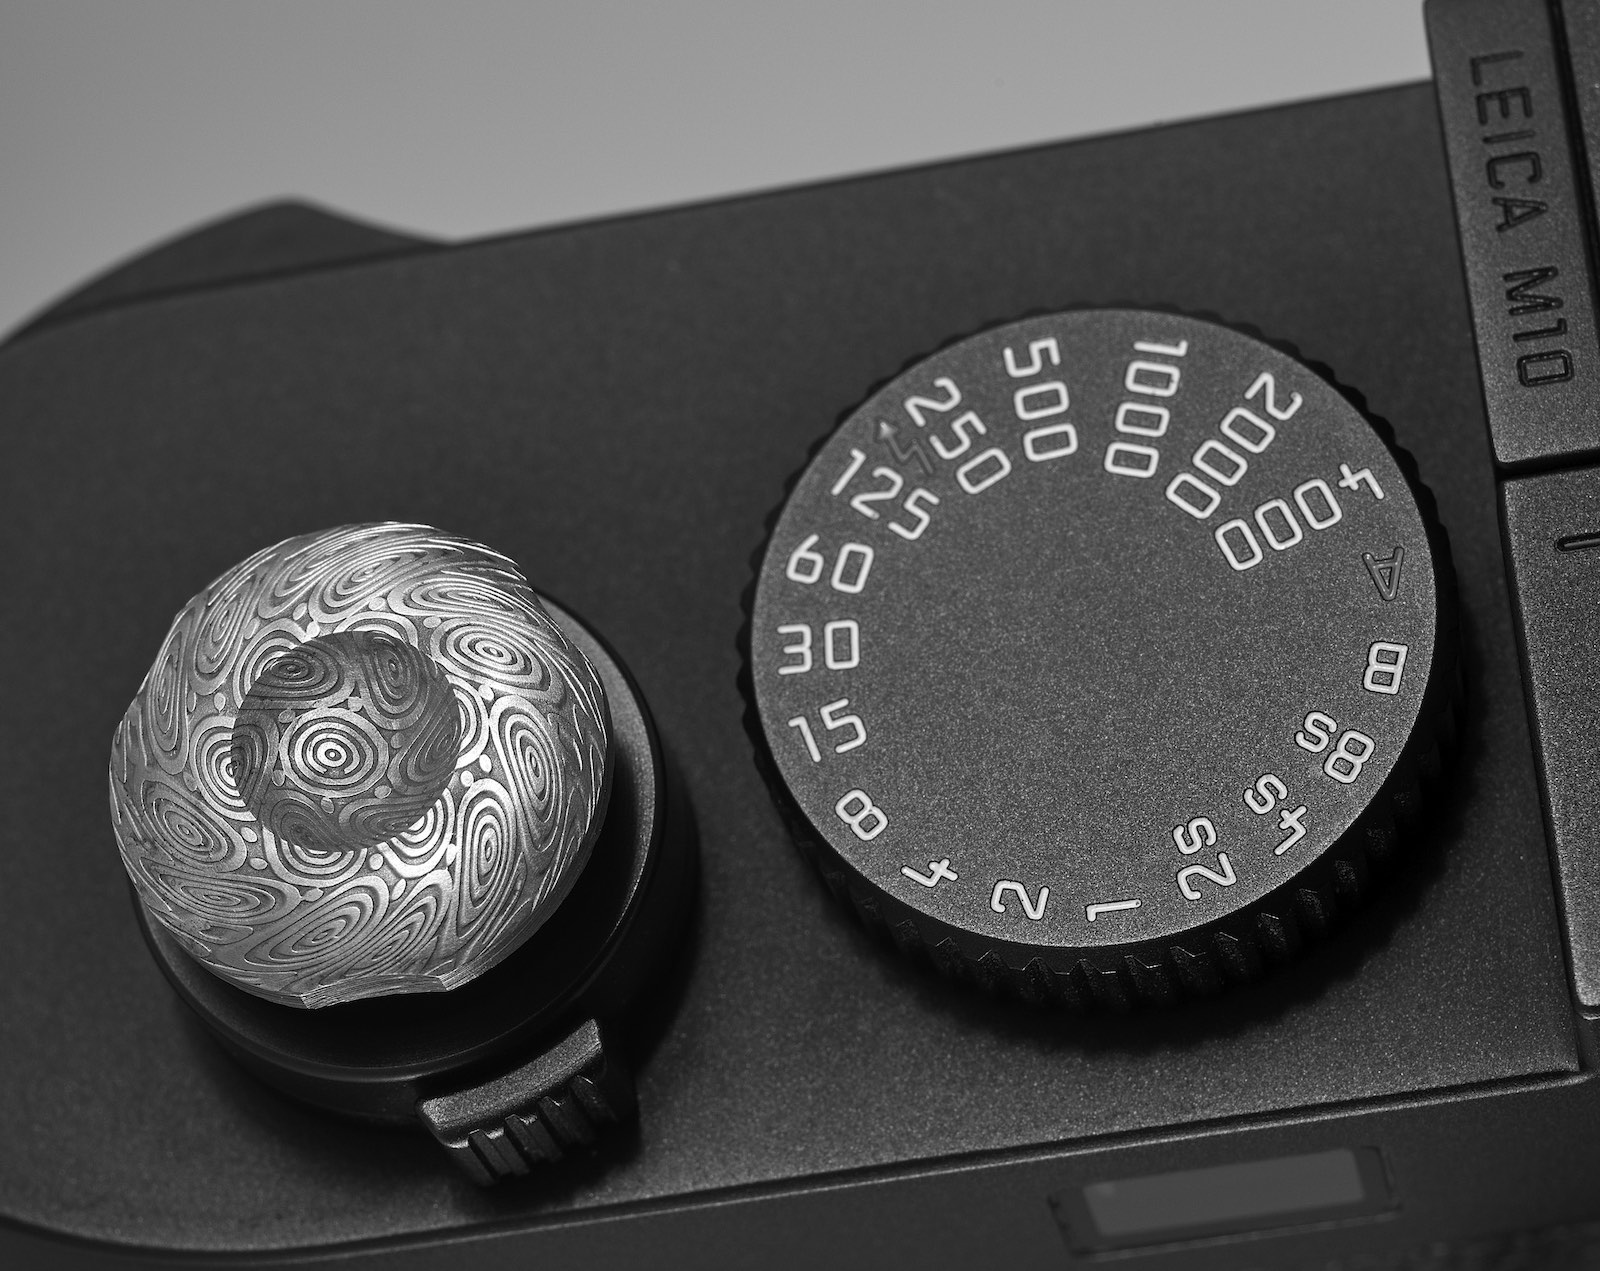 New Komaru Damascus limited edition soft release button released - Leica  Rumors